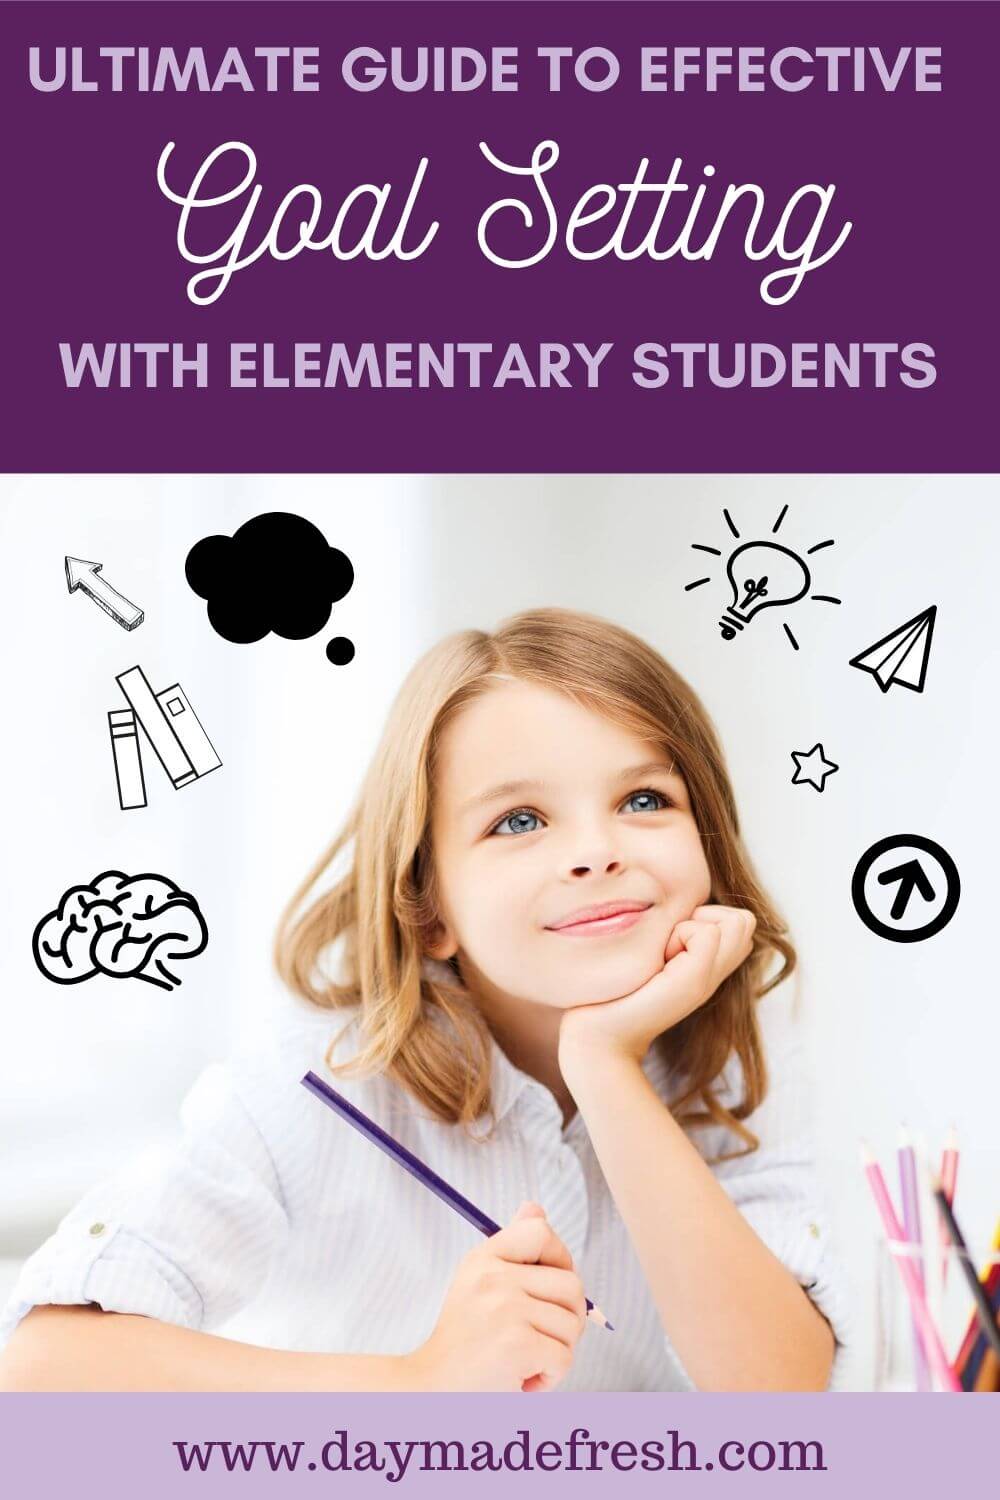 Image Text: Ultimate Guide to Effective Goal Setting with Elementary Students Image: Girl thinking and setting goals